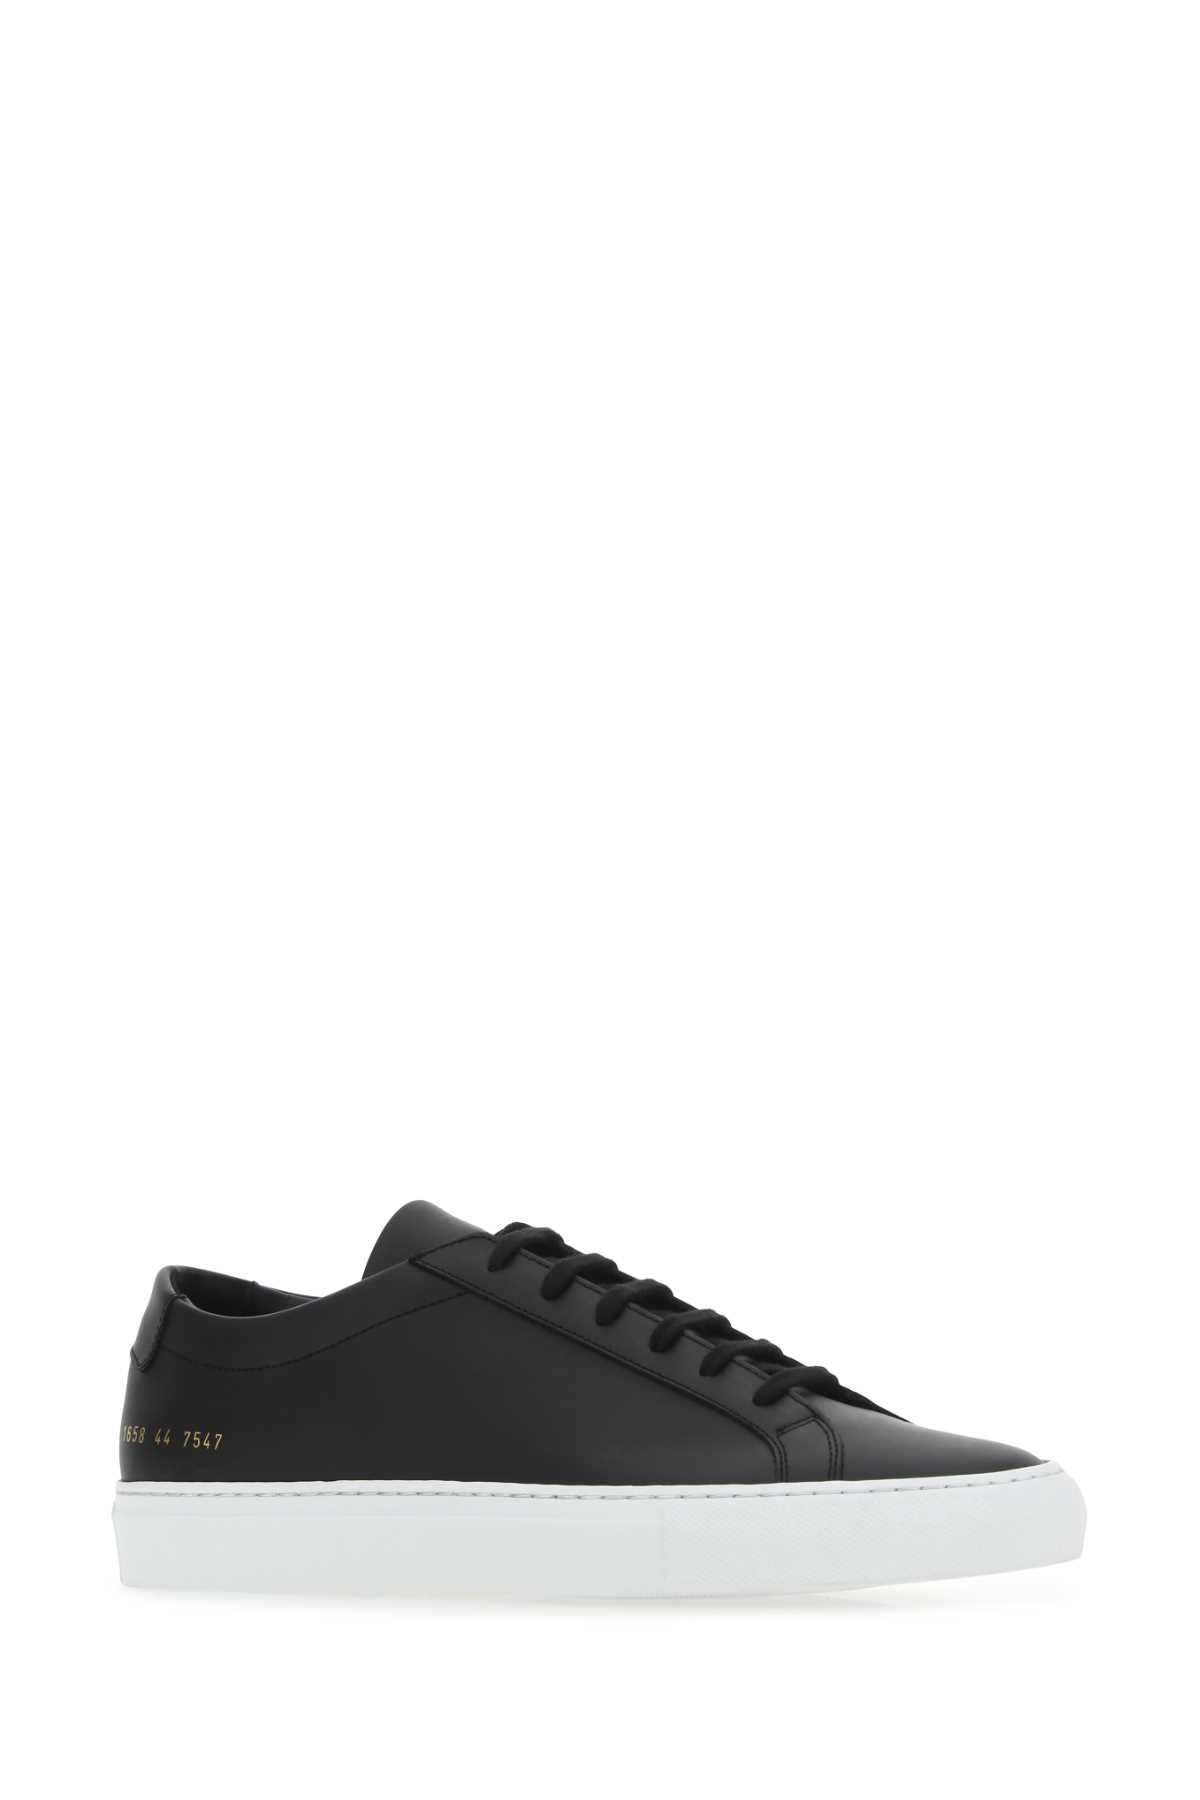 Common Projects Black Leather Achilles Trainers